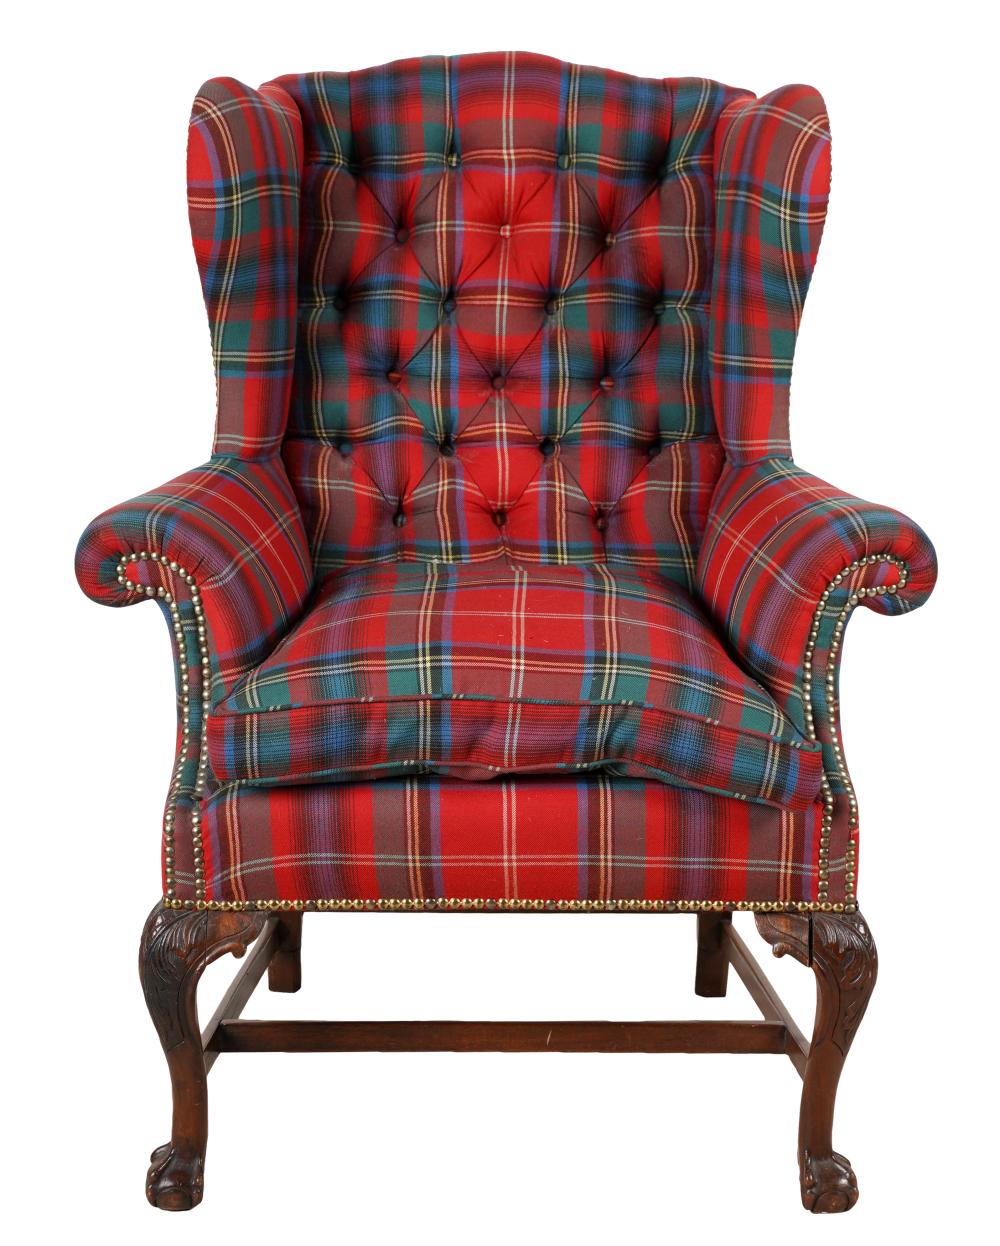 CHIPPENDALE-STYLE WINGCHAIRcovered with